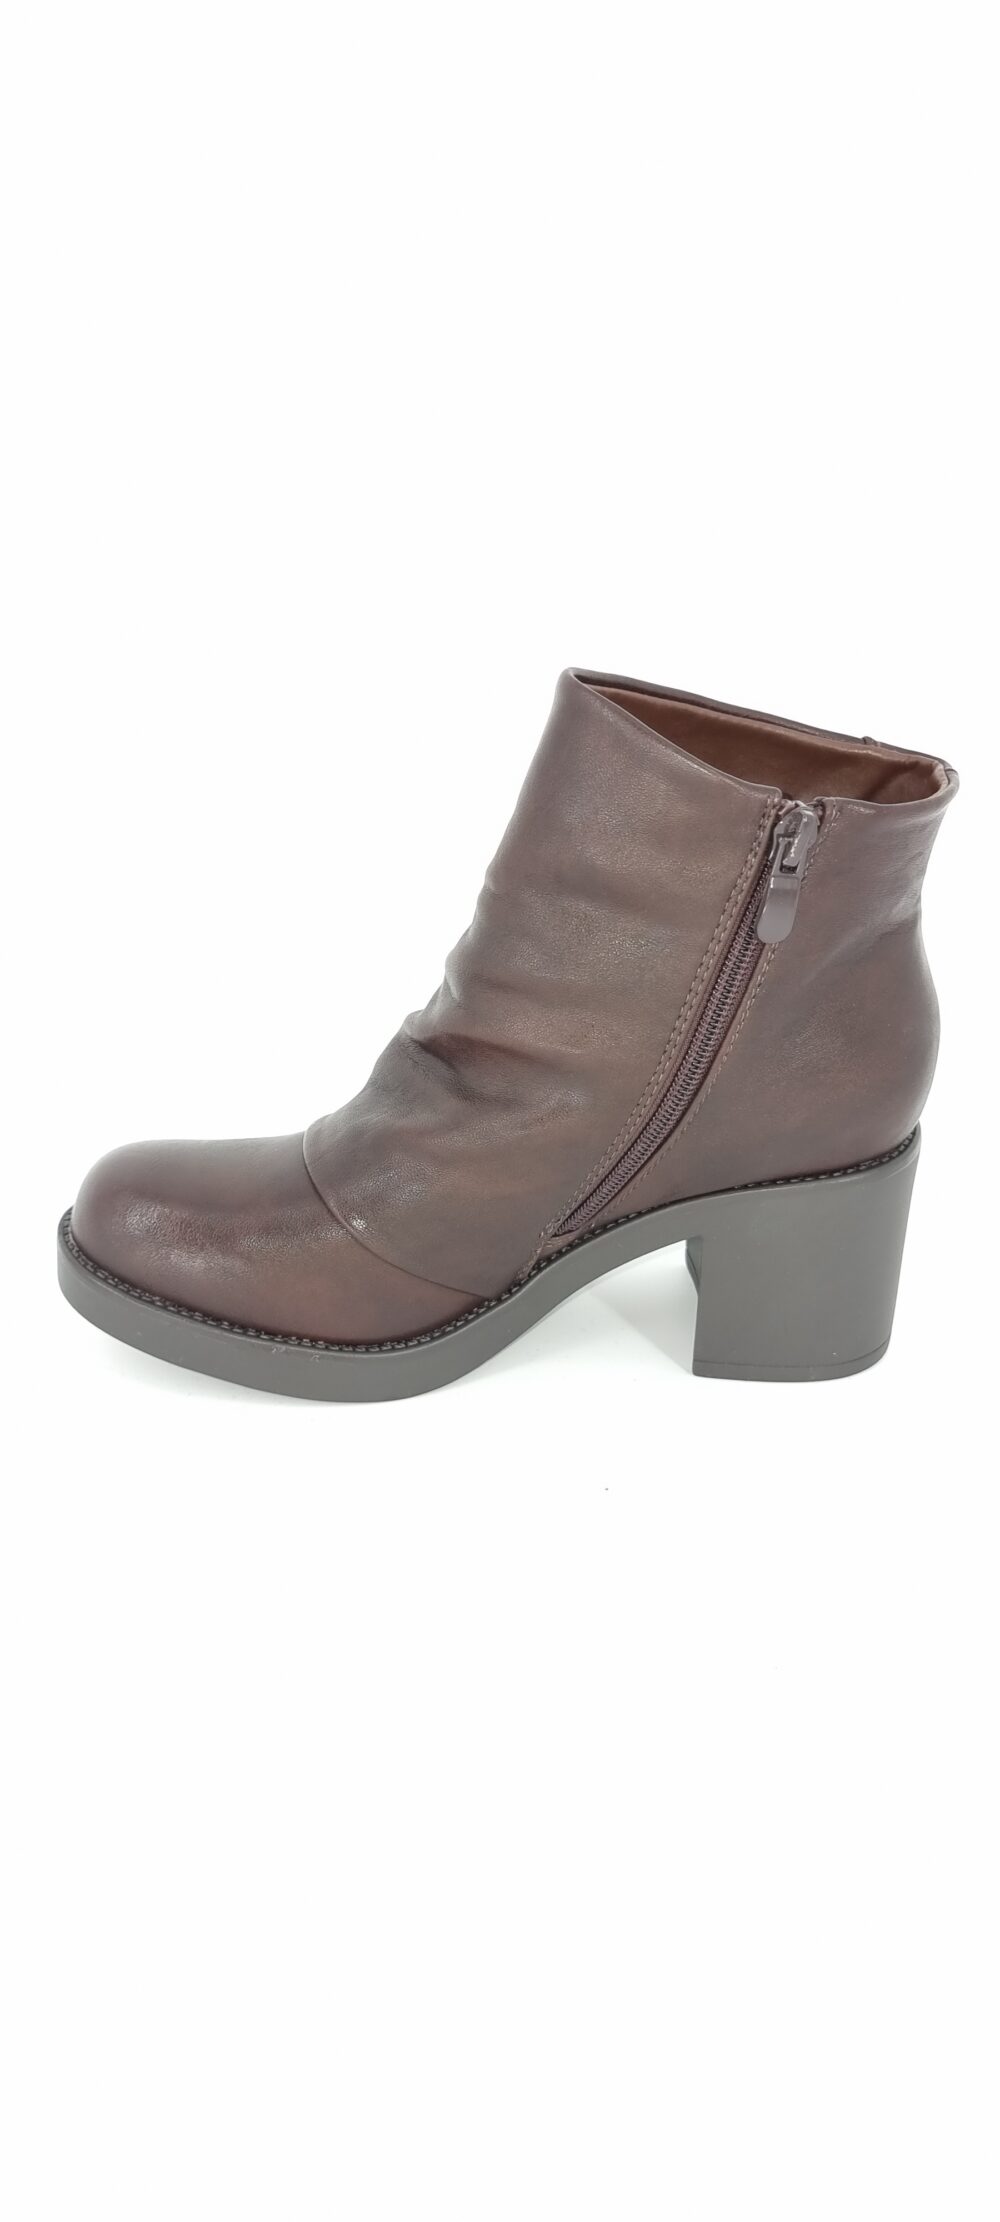 Round toe boot and low thick heel brown